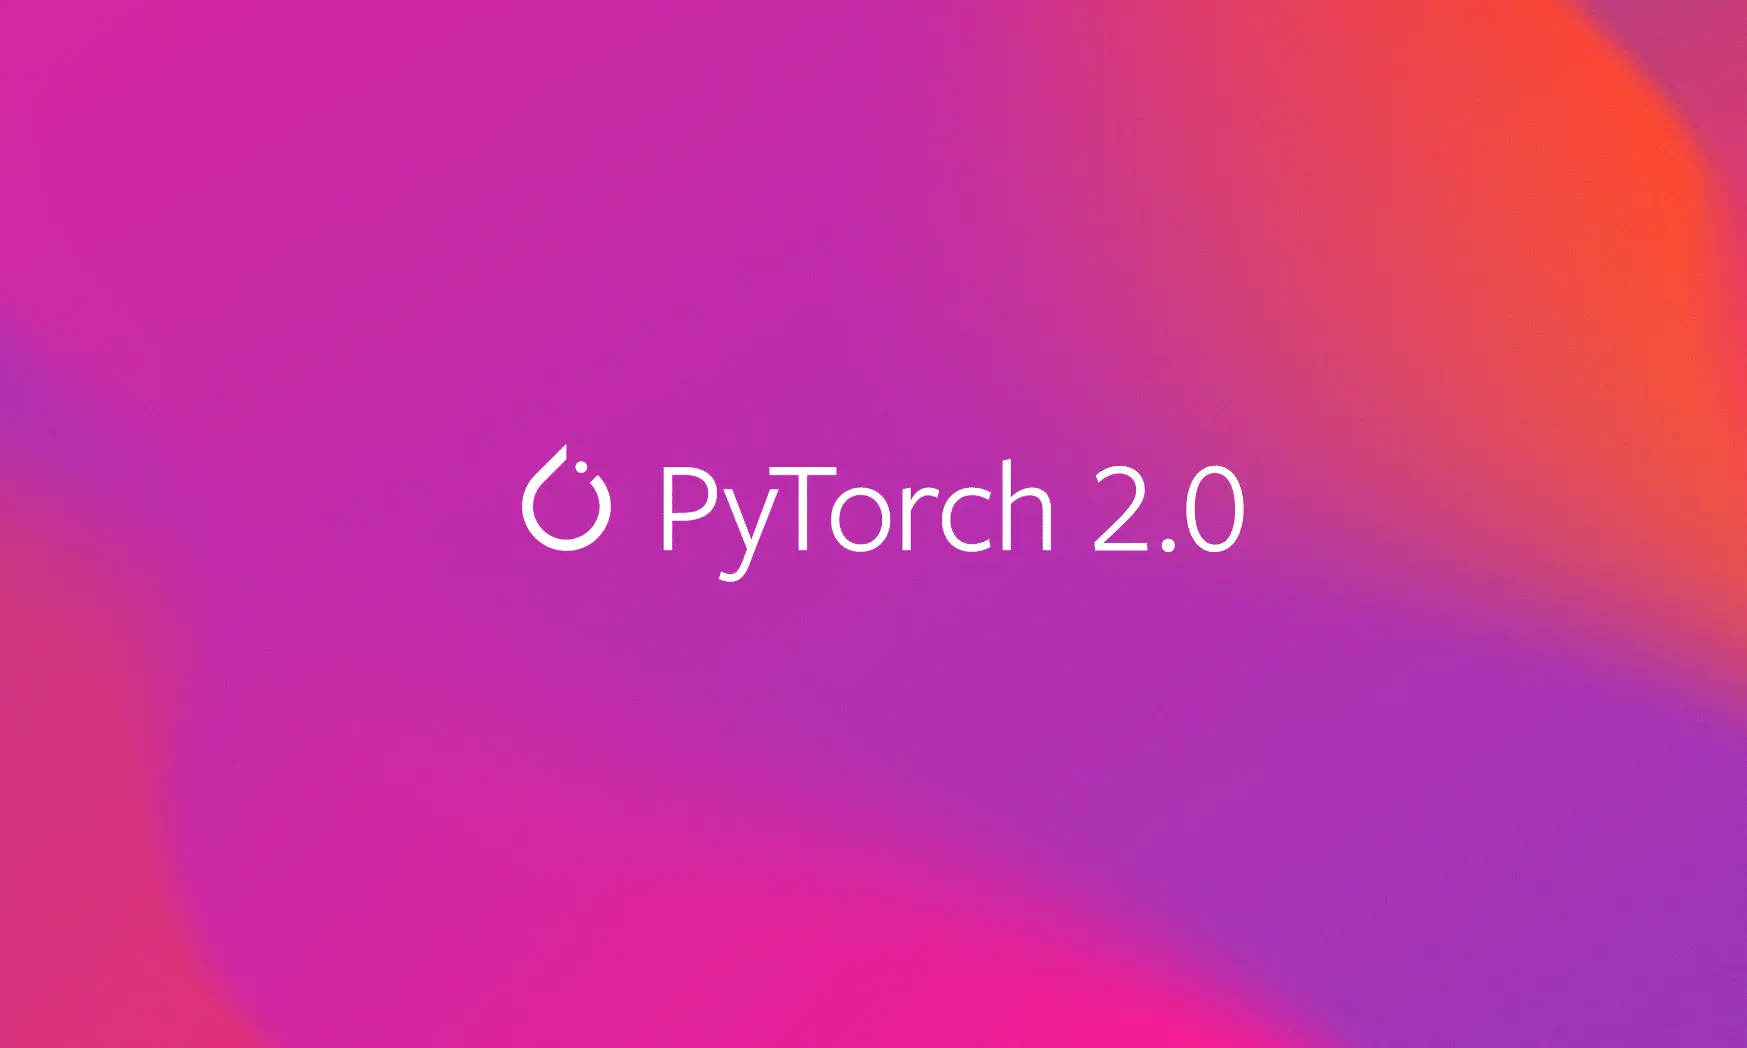 The next-generation release of PyTorch 2.0 surprises with more speed, pythonization, and dynamism